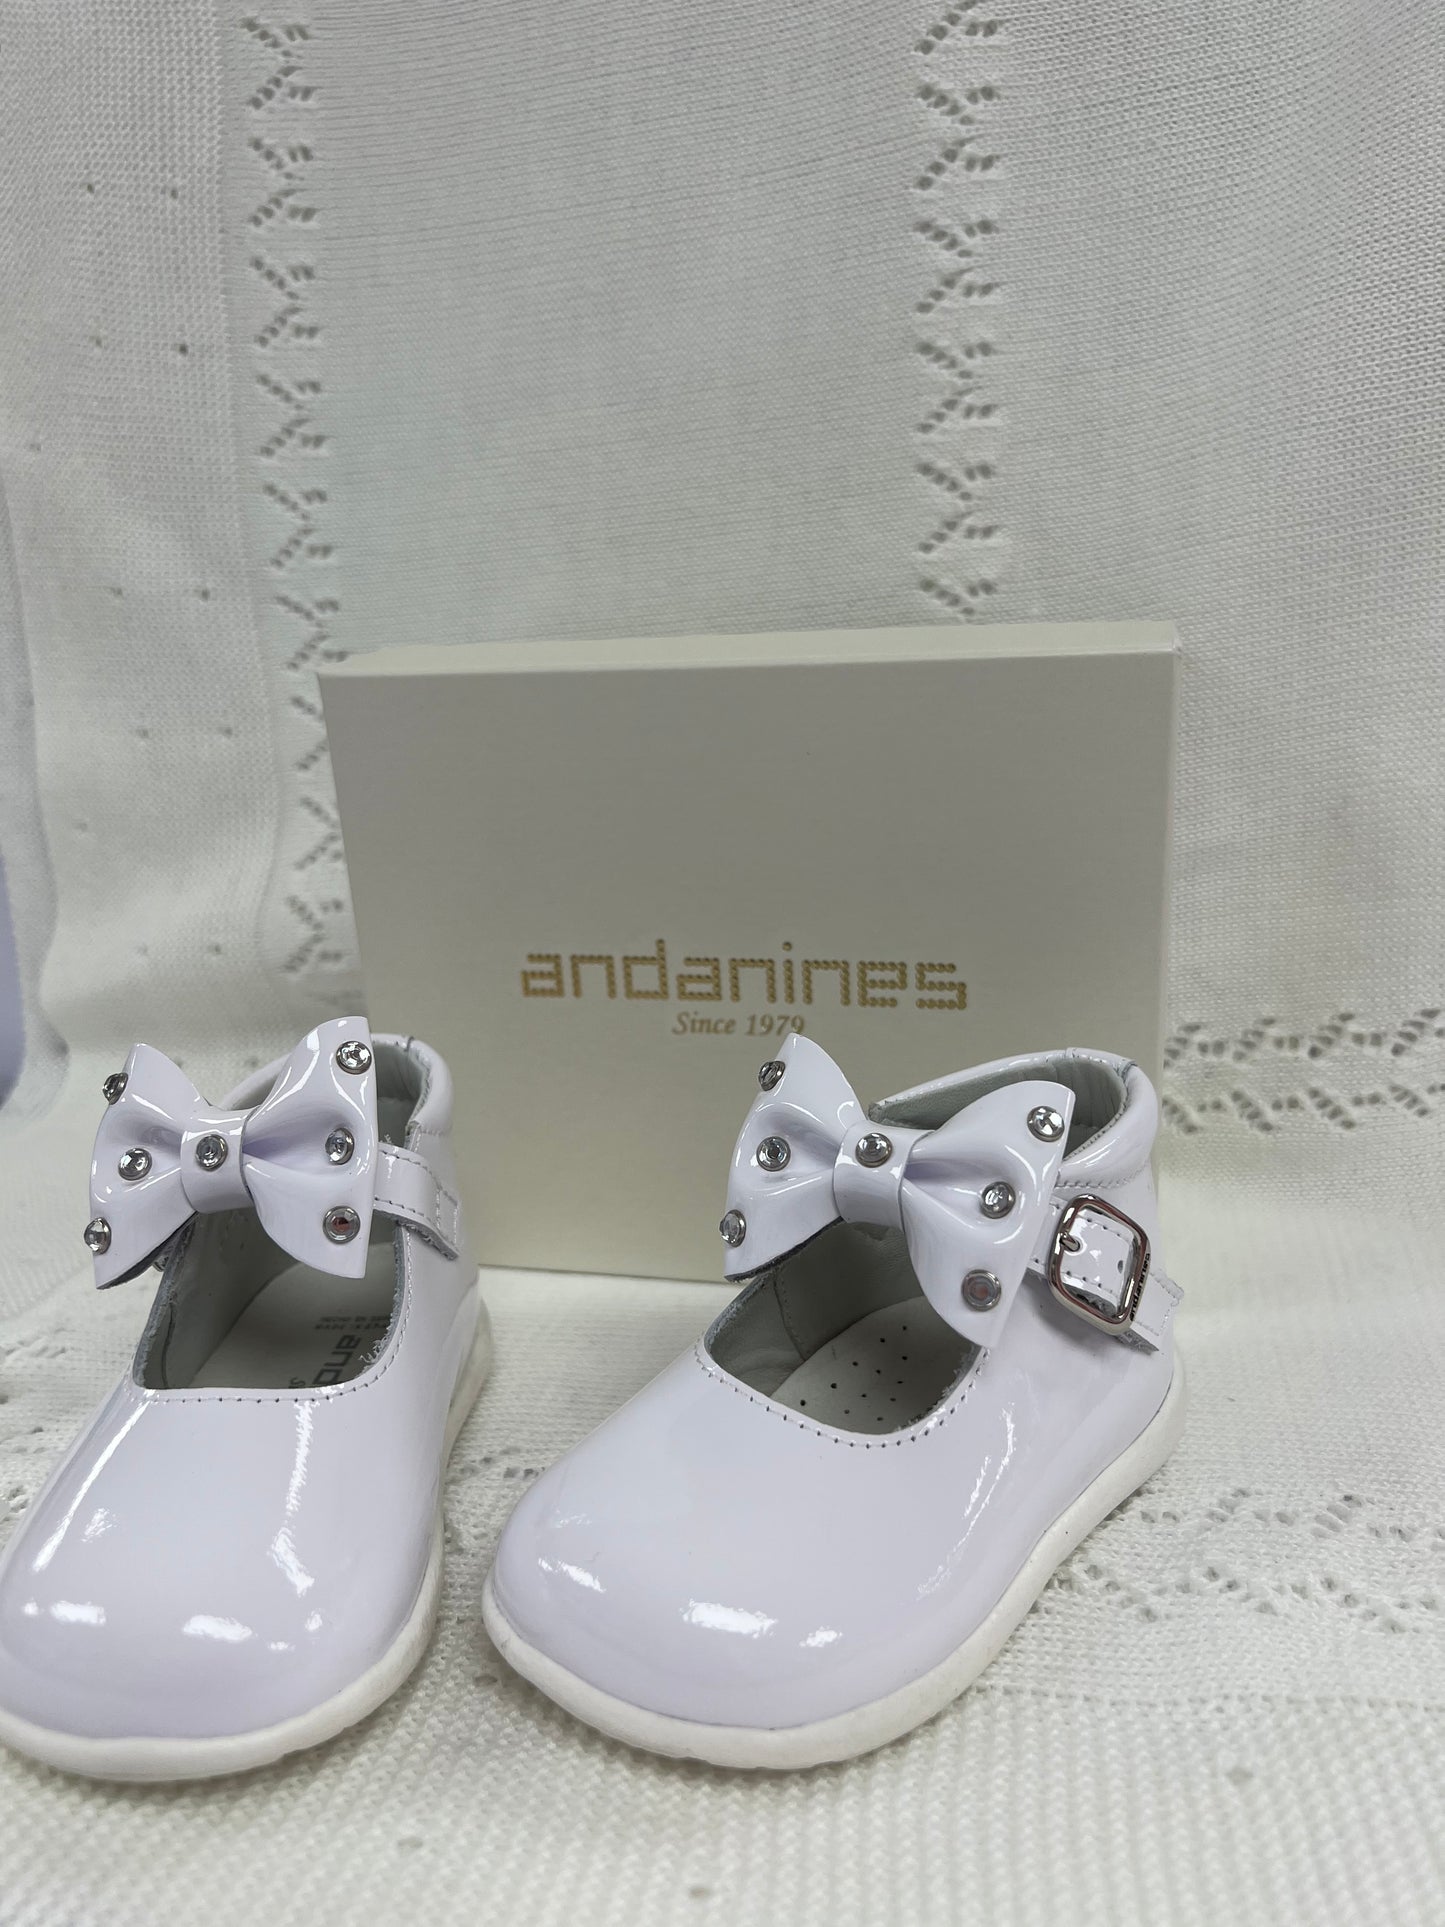 231287 White Stud Patent Bow Andanines